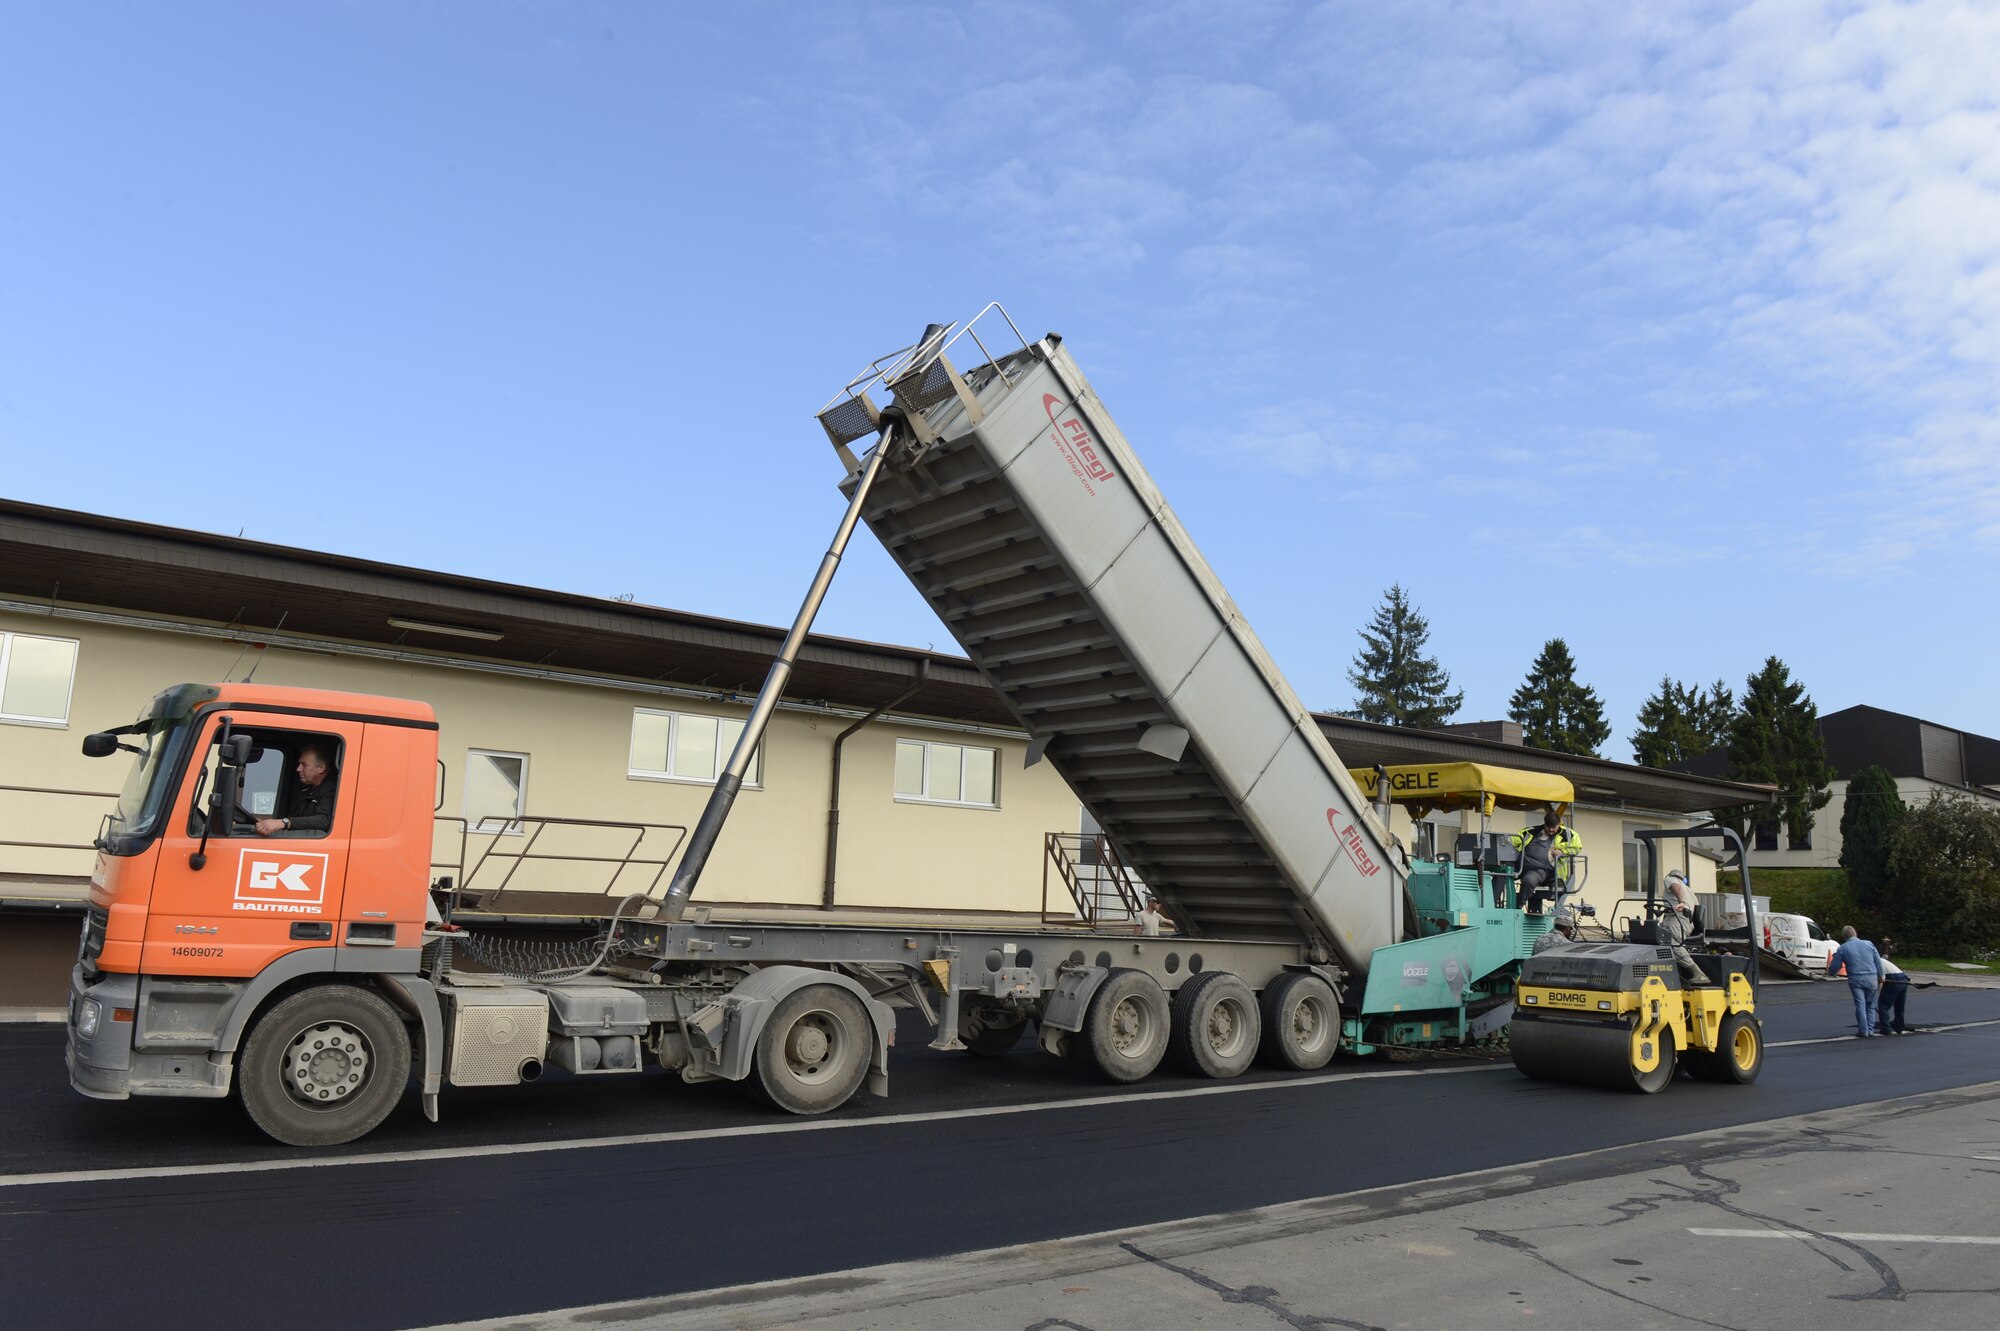 Airmen from the 52nd Civil Engineer Squadron, with help from the 435th Construction Training Squadron, Ramstein Air Base, work to replace the asphalt behind the 52nd Logistics Readiness Squadron at Spangdahlem Air Base, Germany, Sept. 12, 2014. The road was replaced due to cracks in the asphalt. (U.S. Air Force photo by Staff Sgt. Christopher Ruano/Released)